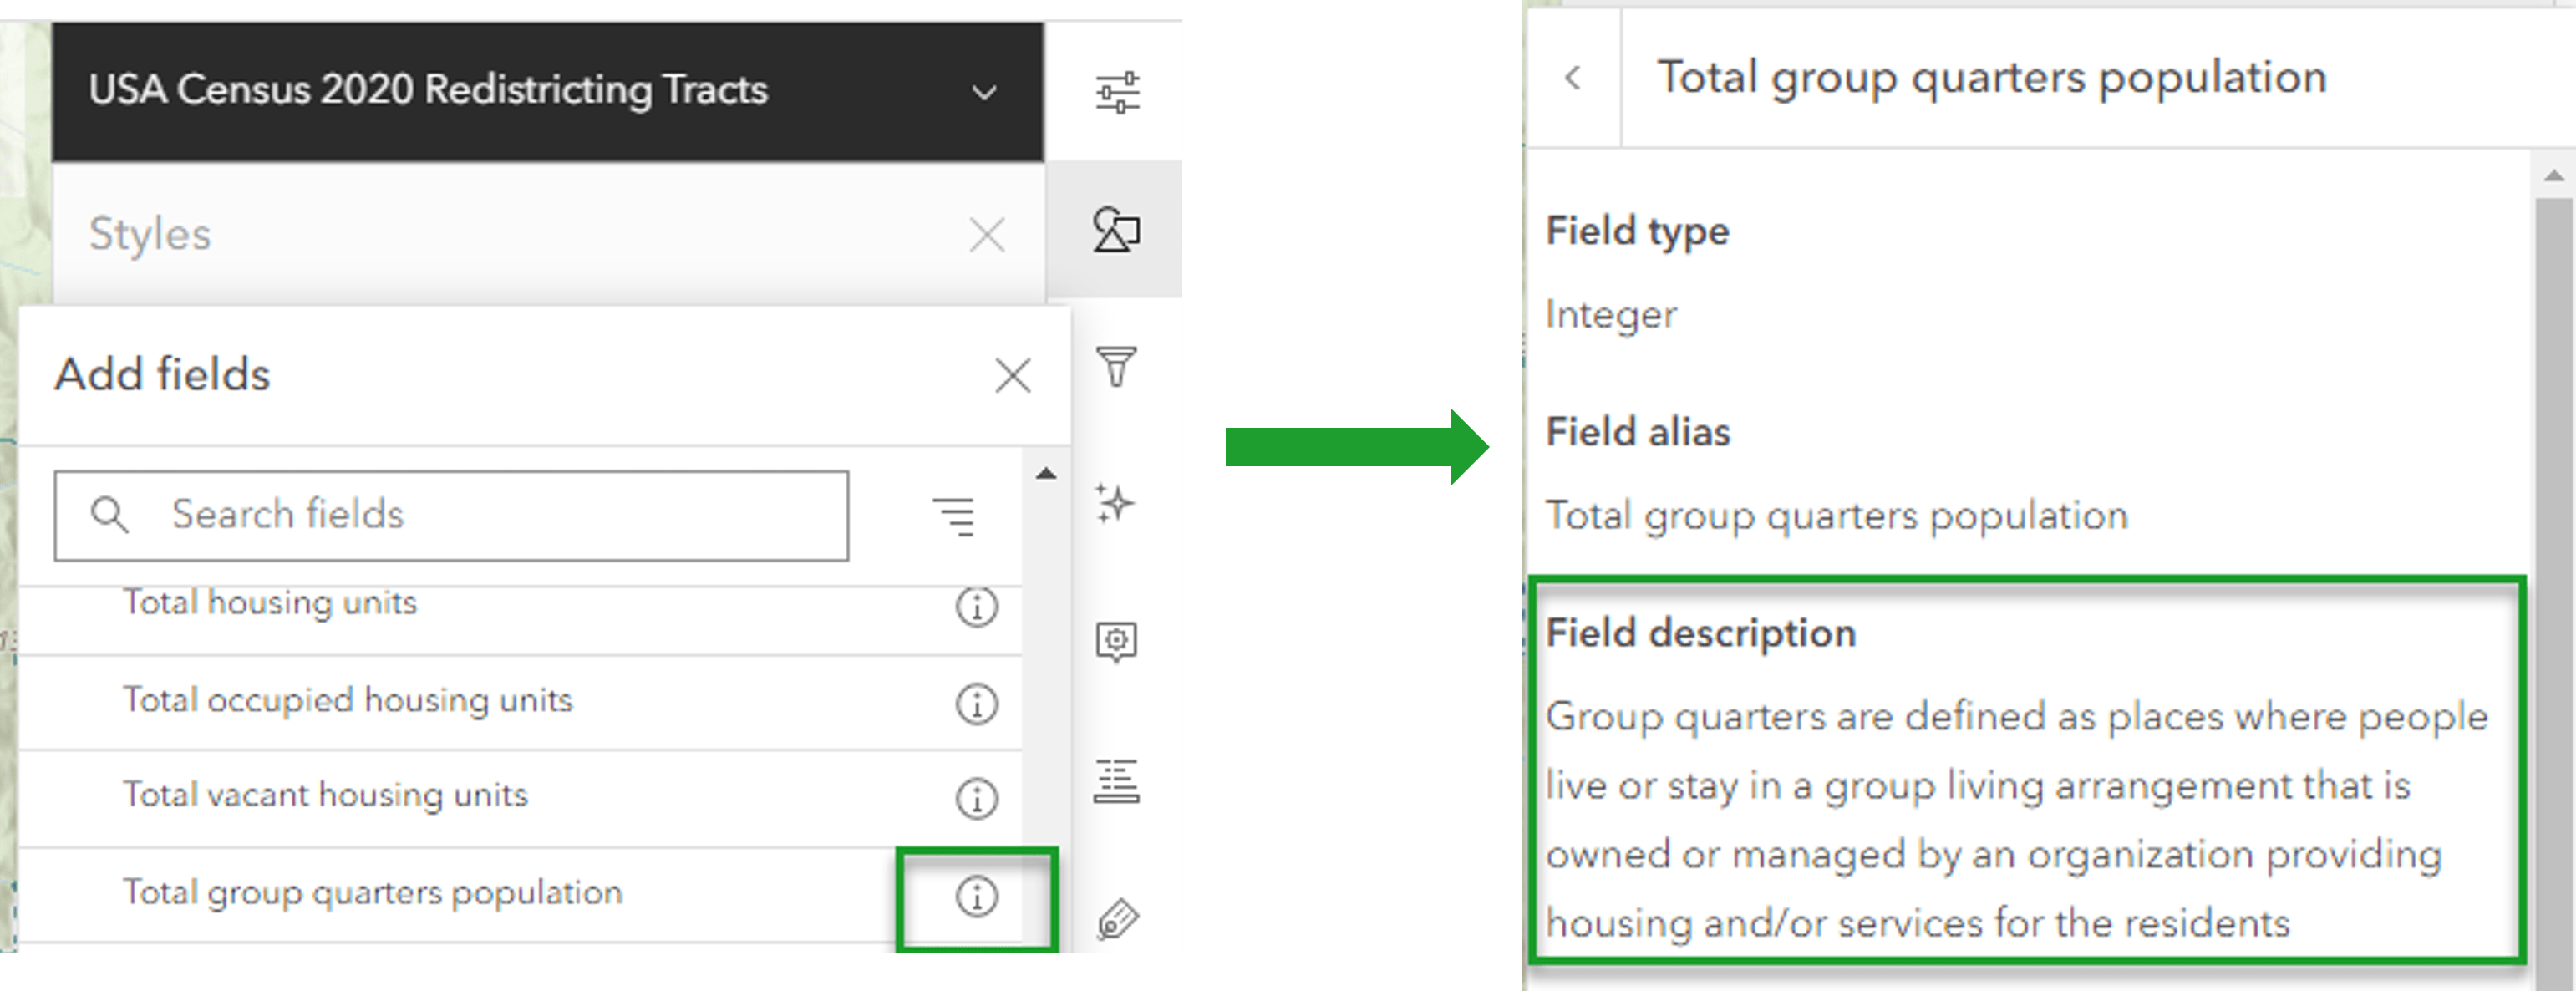 The "i" information button next to the field "Total group quarters population" in the Styles Options reveals the Field Description: 'Group quarters are defined as places where people live or stay in a group living arrangement that is owned or managed by an organization providing housing and/or services for the residents'